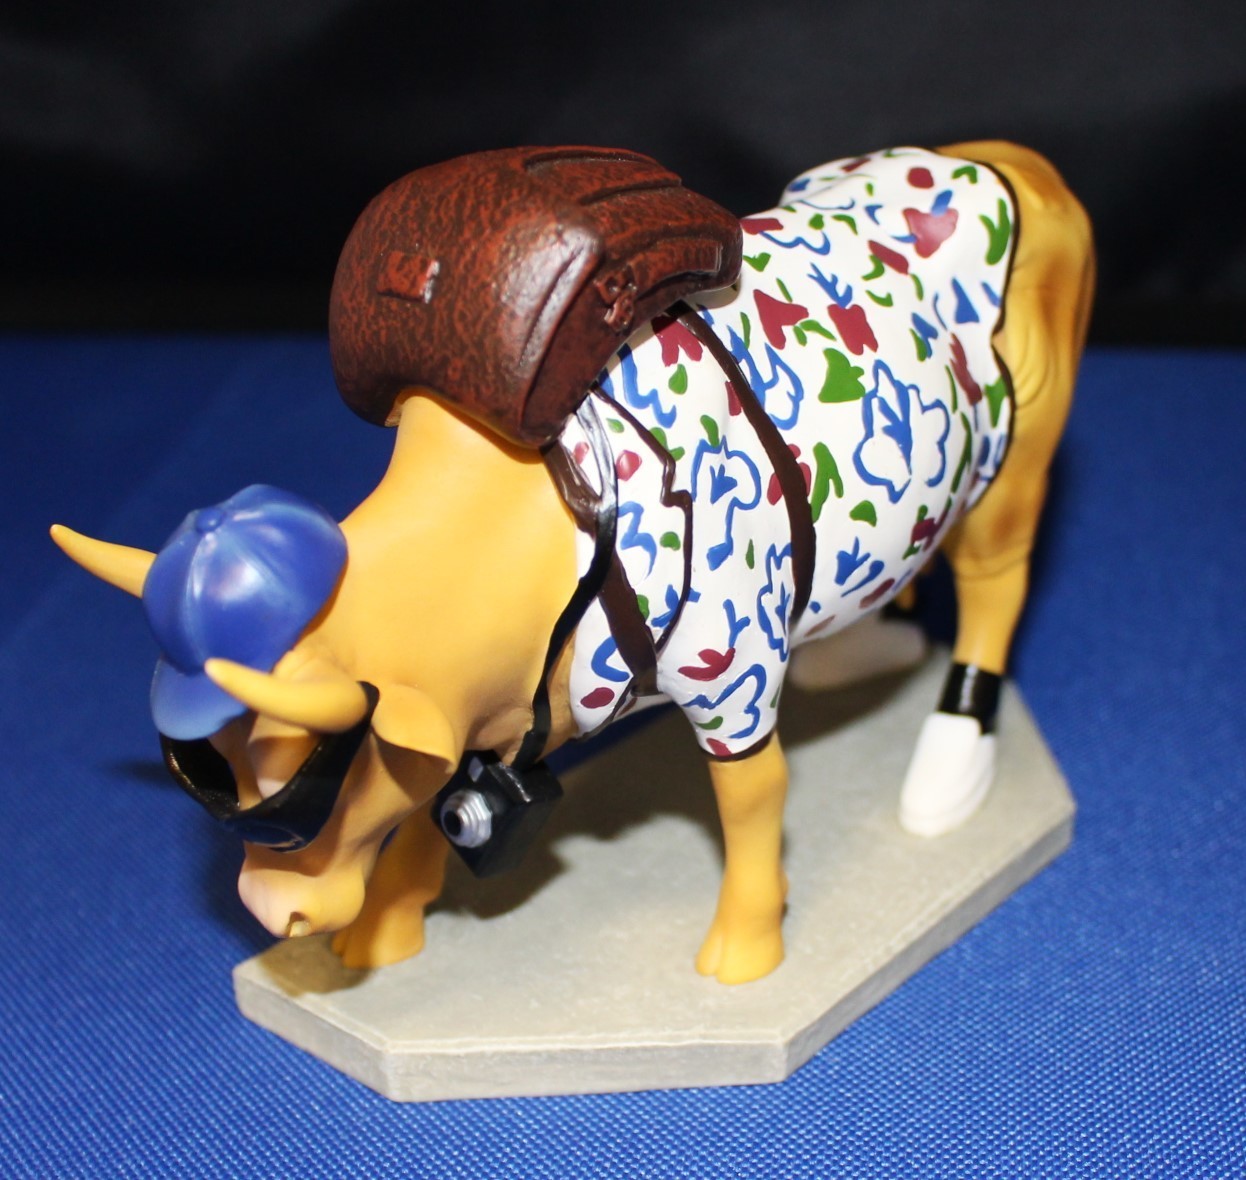 Cow Parade “Out of Cow Towner” 1/3495 Retired Figurine #9121